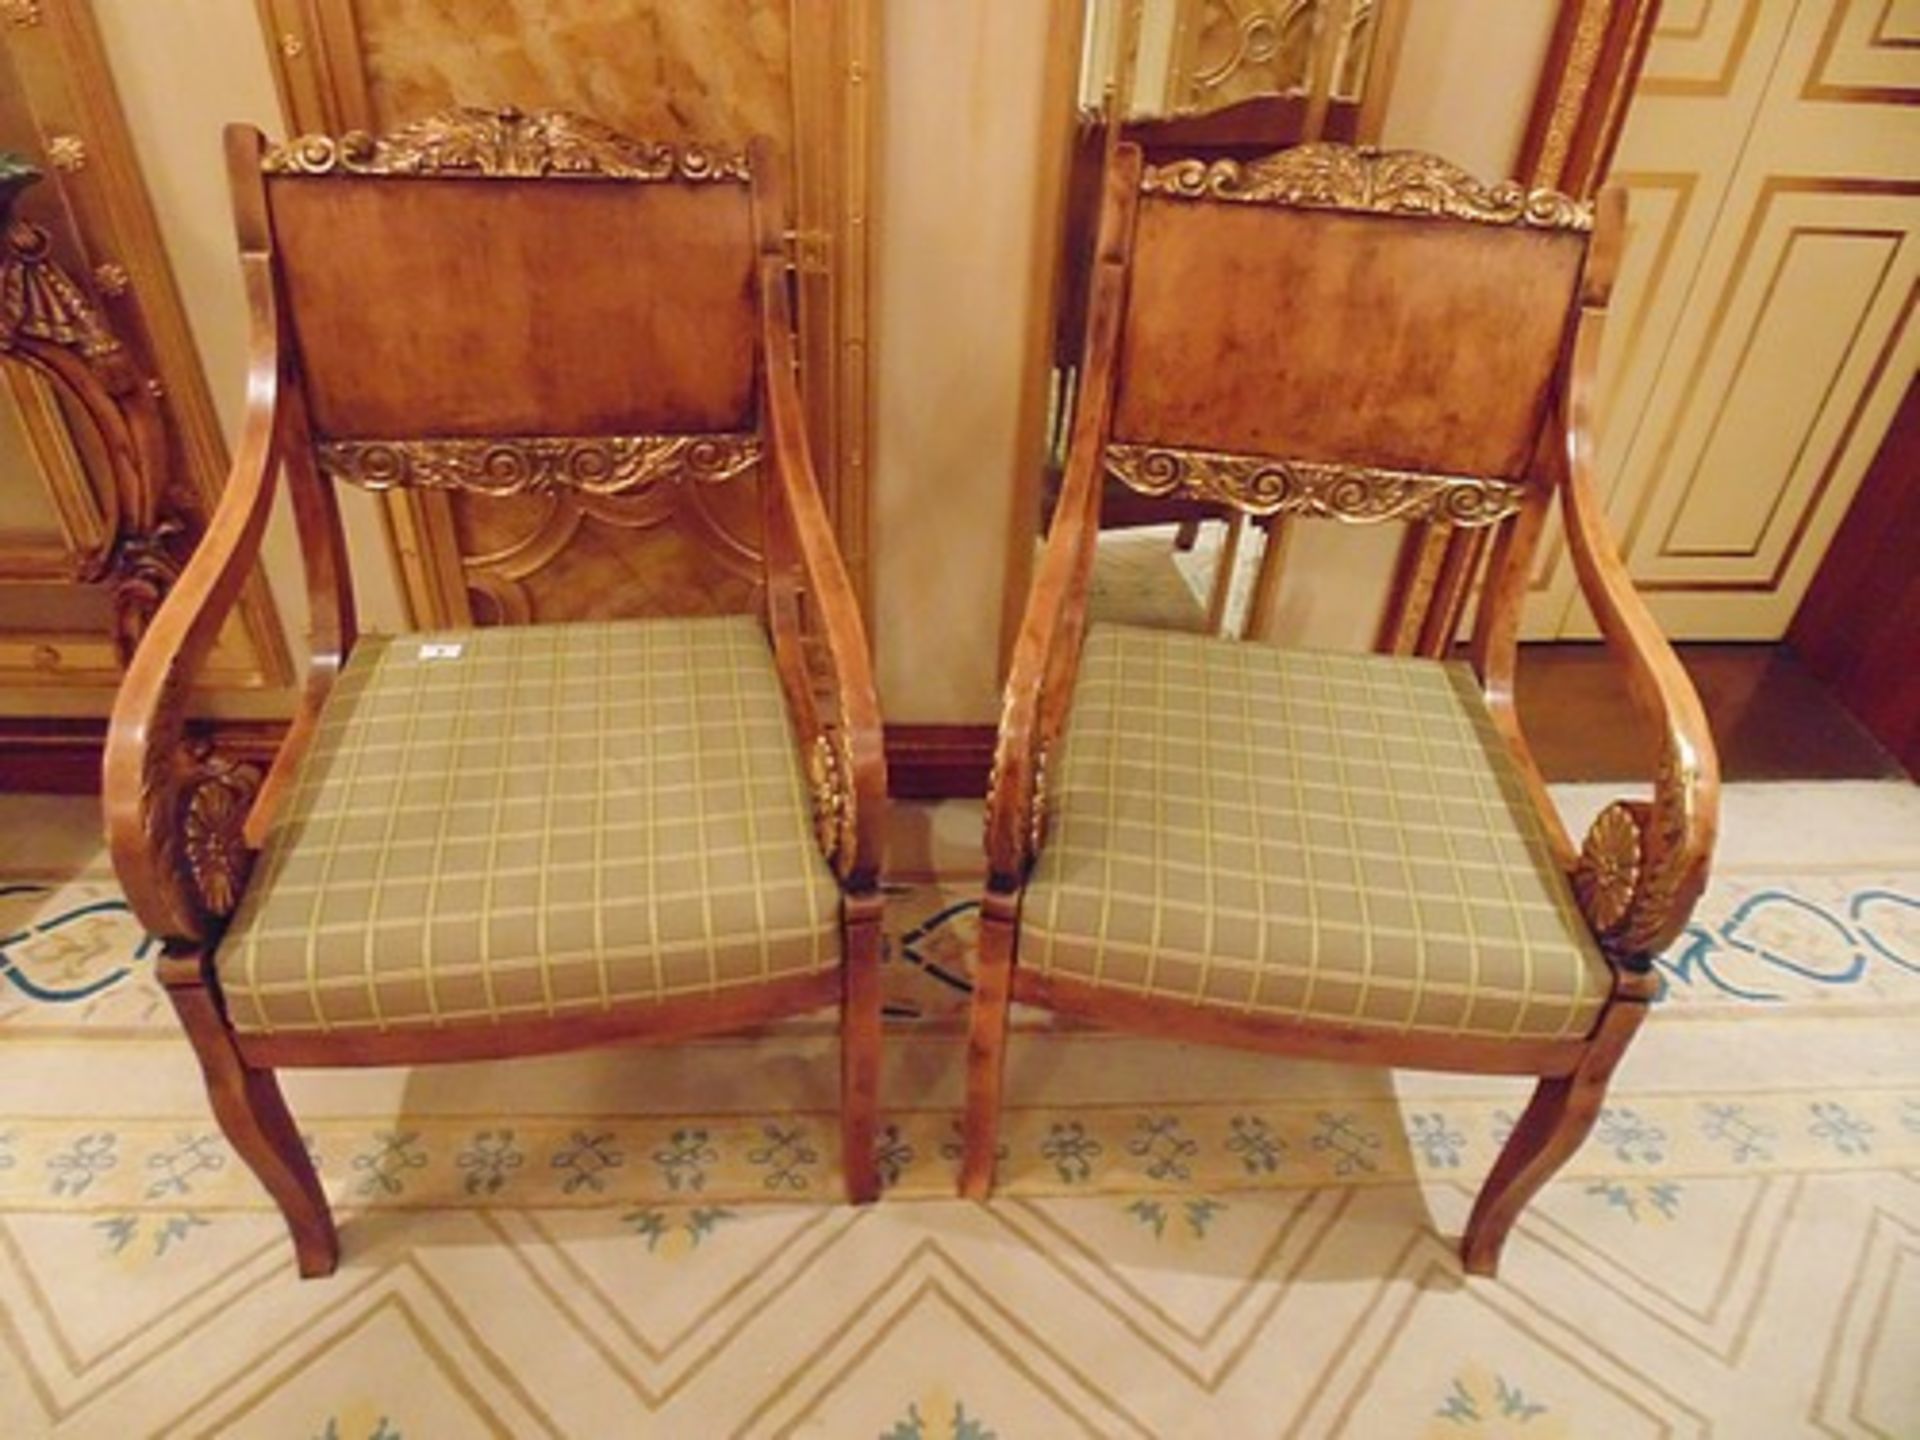 Pair of French Louis XVI Style armchairs straight shoulder boards with book match veneer, carved